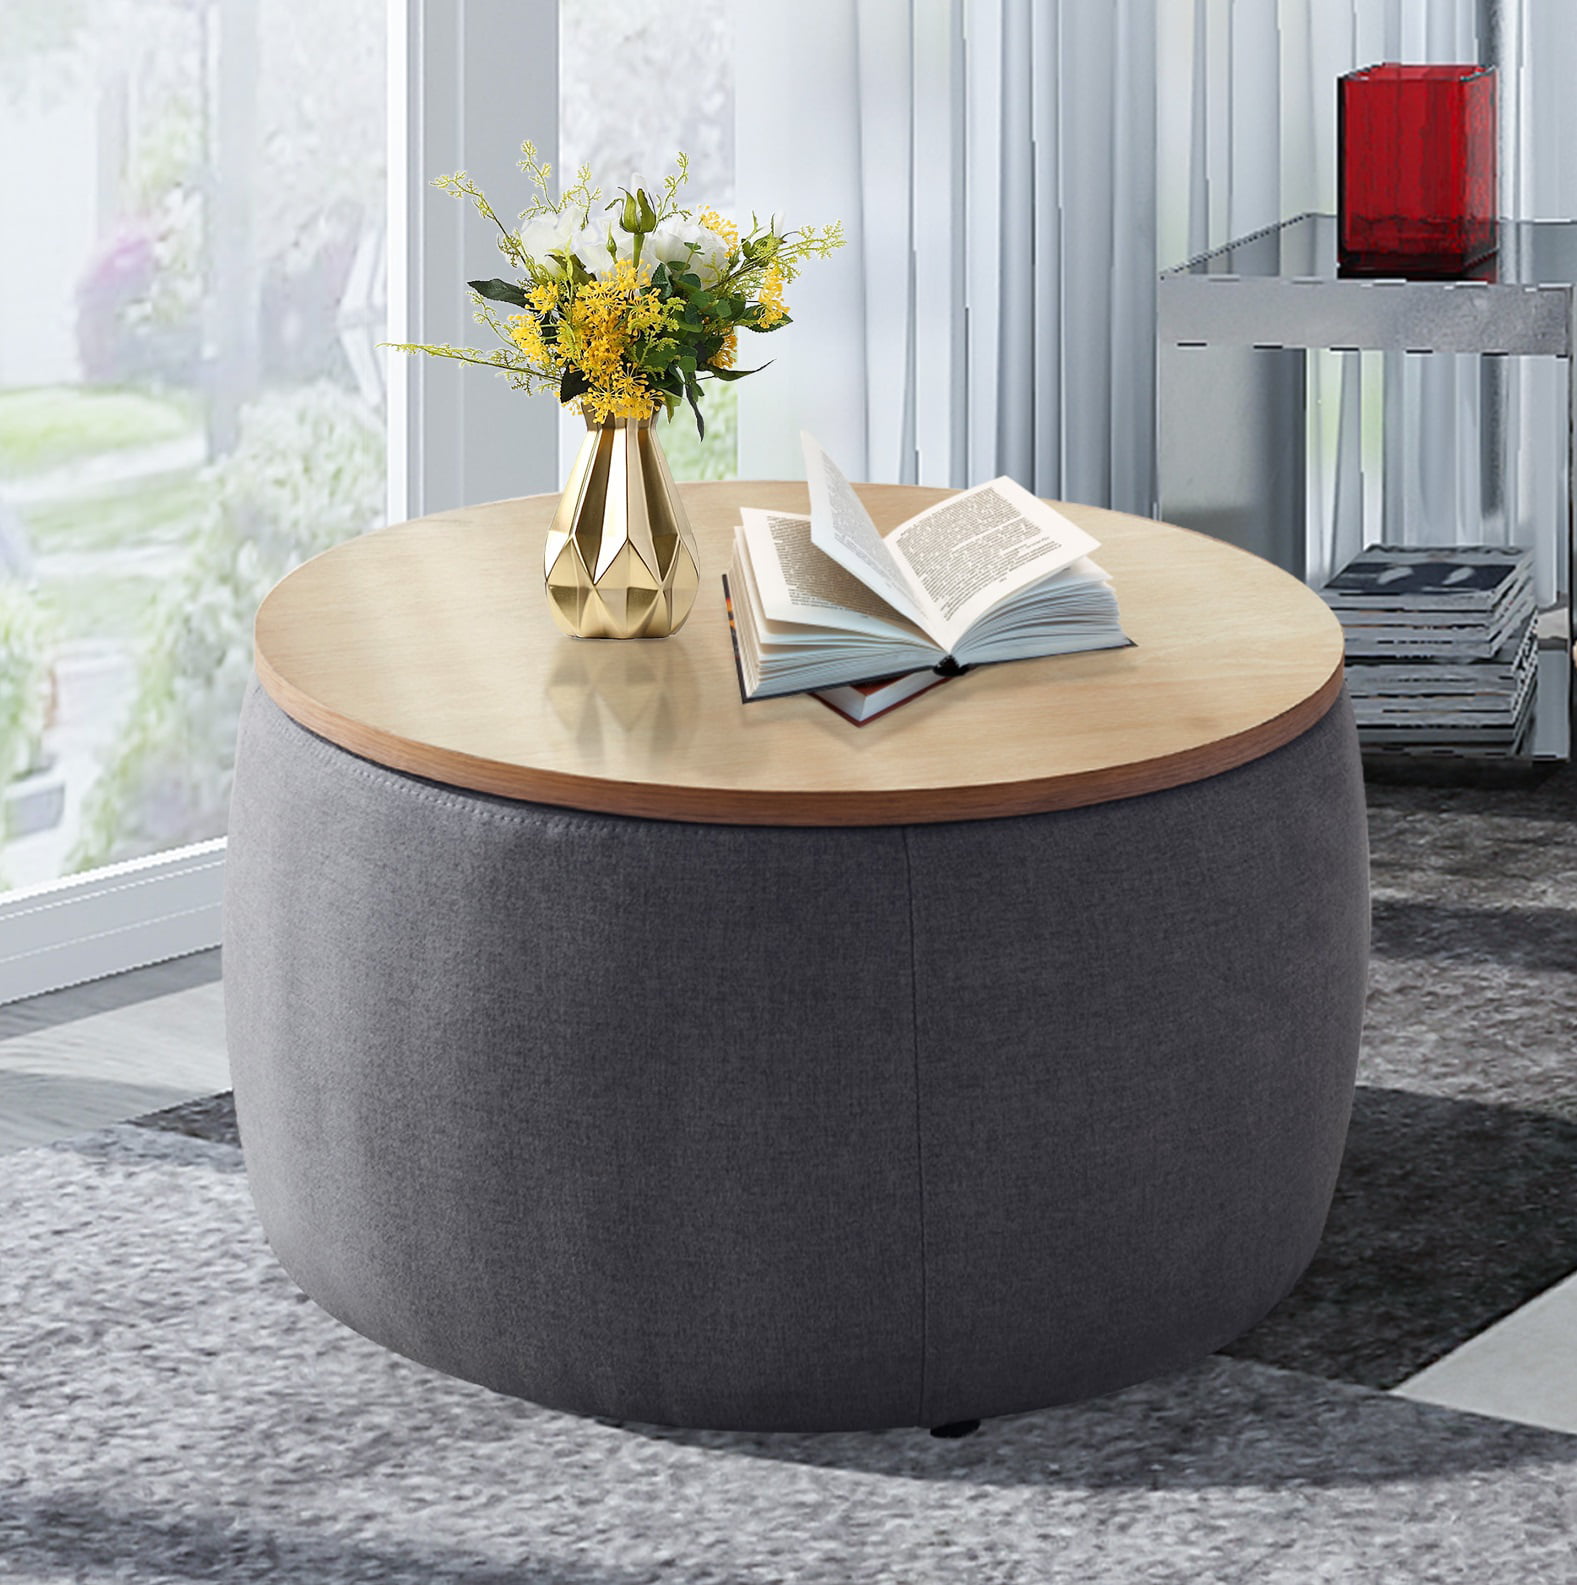 Storage Ottoman with Tray, Round Ottoman Coffee Table Handmade with Storage, Cube Organizer, End Table for Living Room, Gray, LJ422